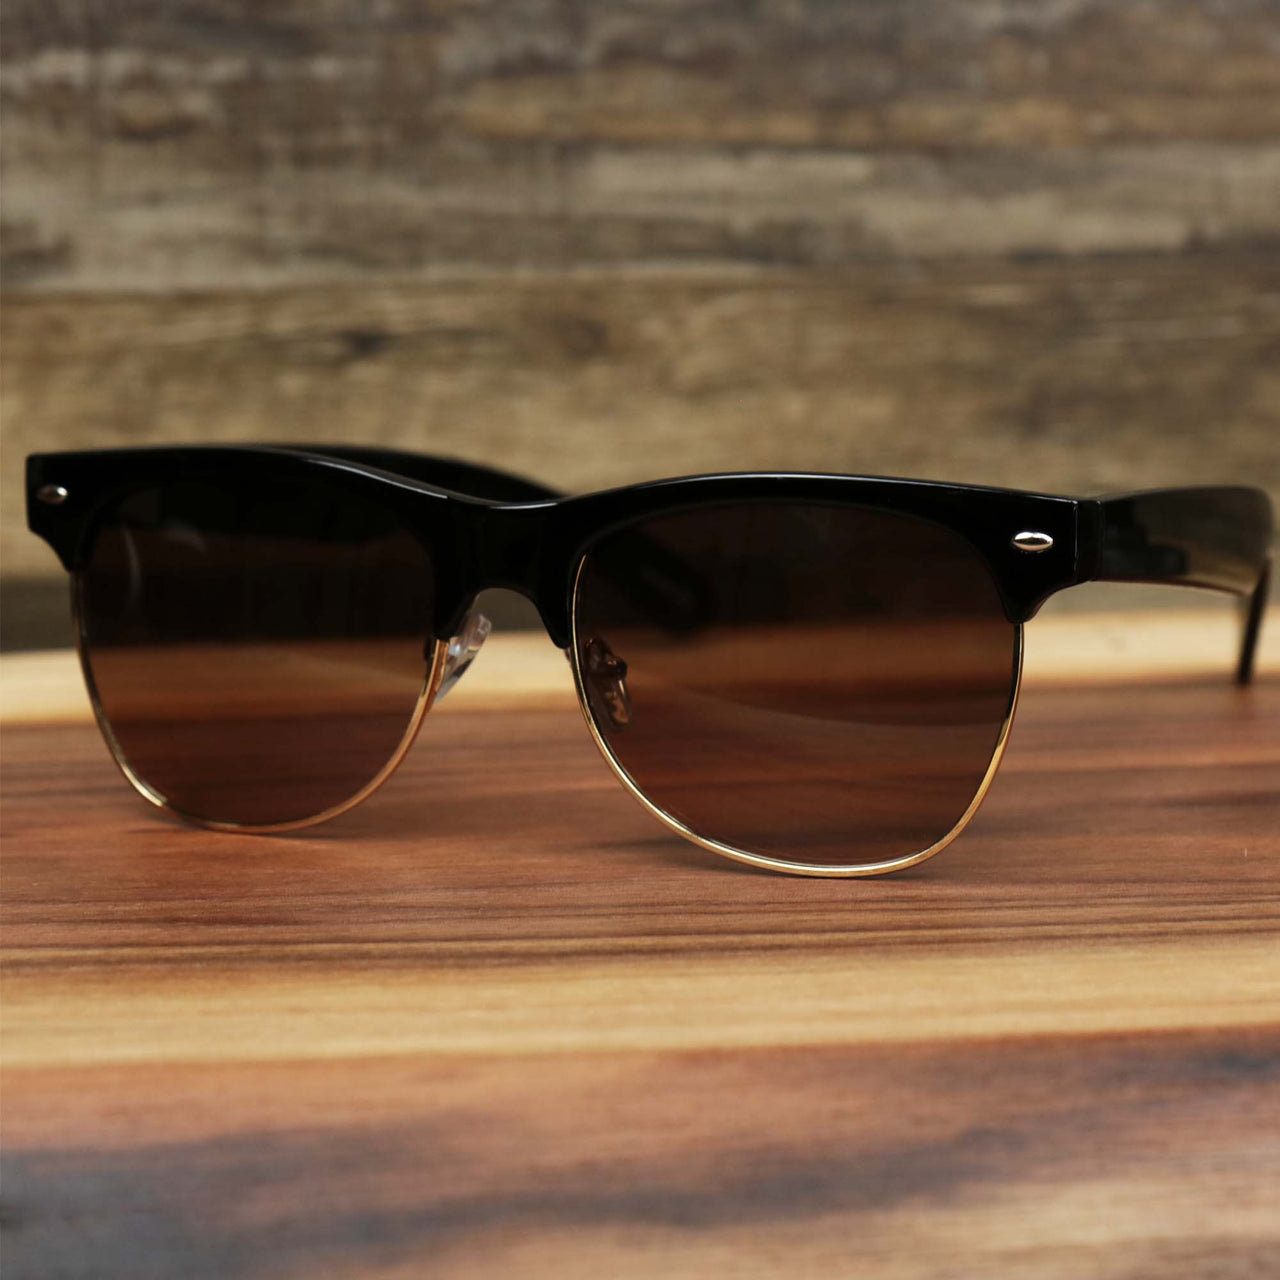 The Thick Top and Metal Bottom Frame Brown Lens Sunglasses with Black Frame